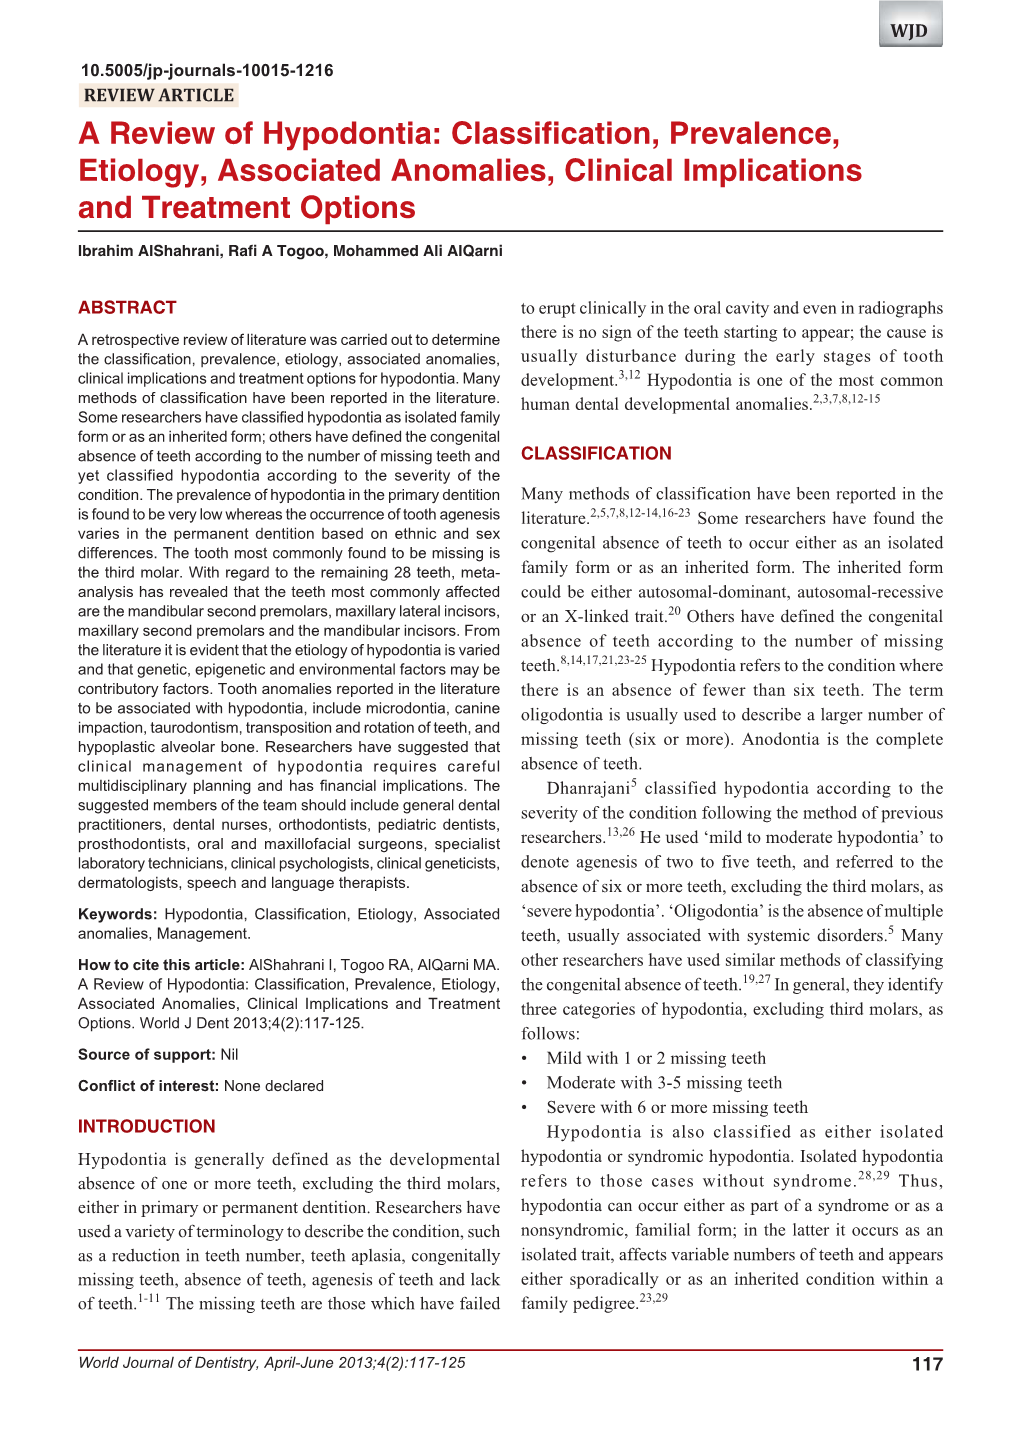 A Review of Hypodontia: Classification, Prevalence, Etiology, Associated Anomalies, Clinical Implications and Treatment Options